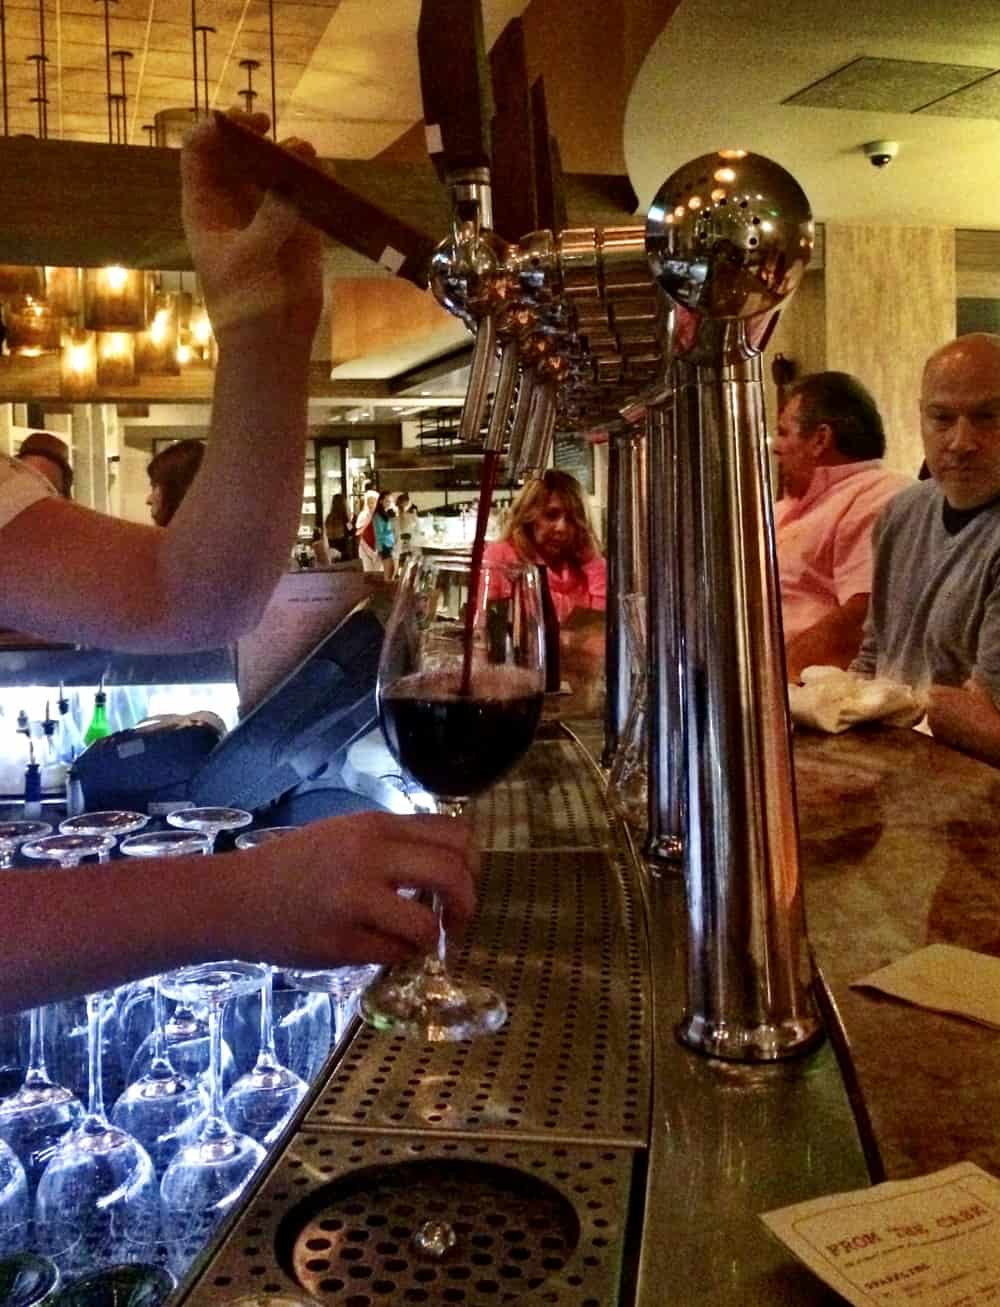 Why Have Wine on Tap? The Answer Might Surprise You